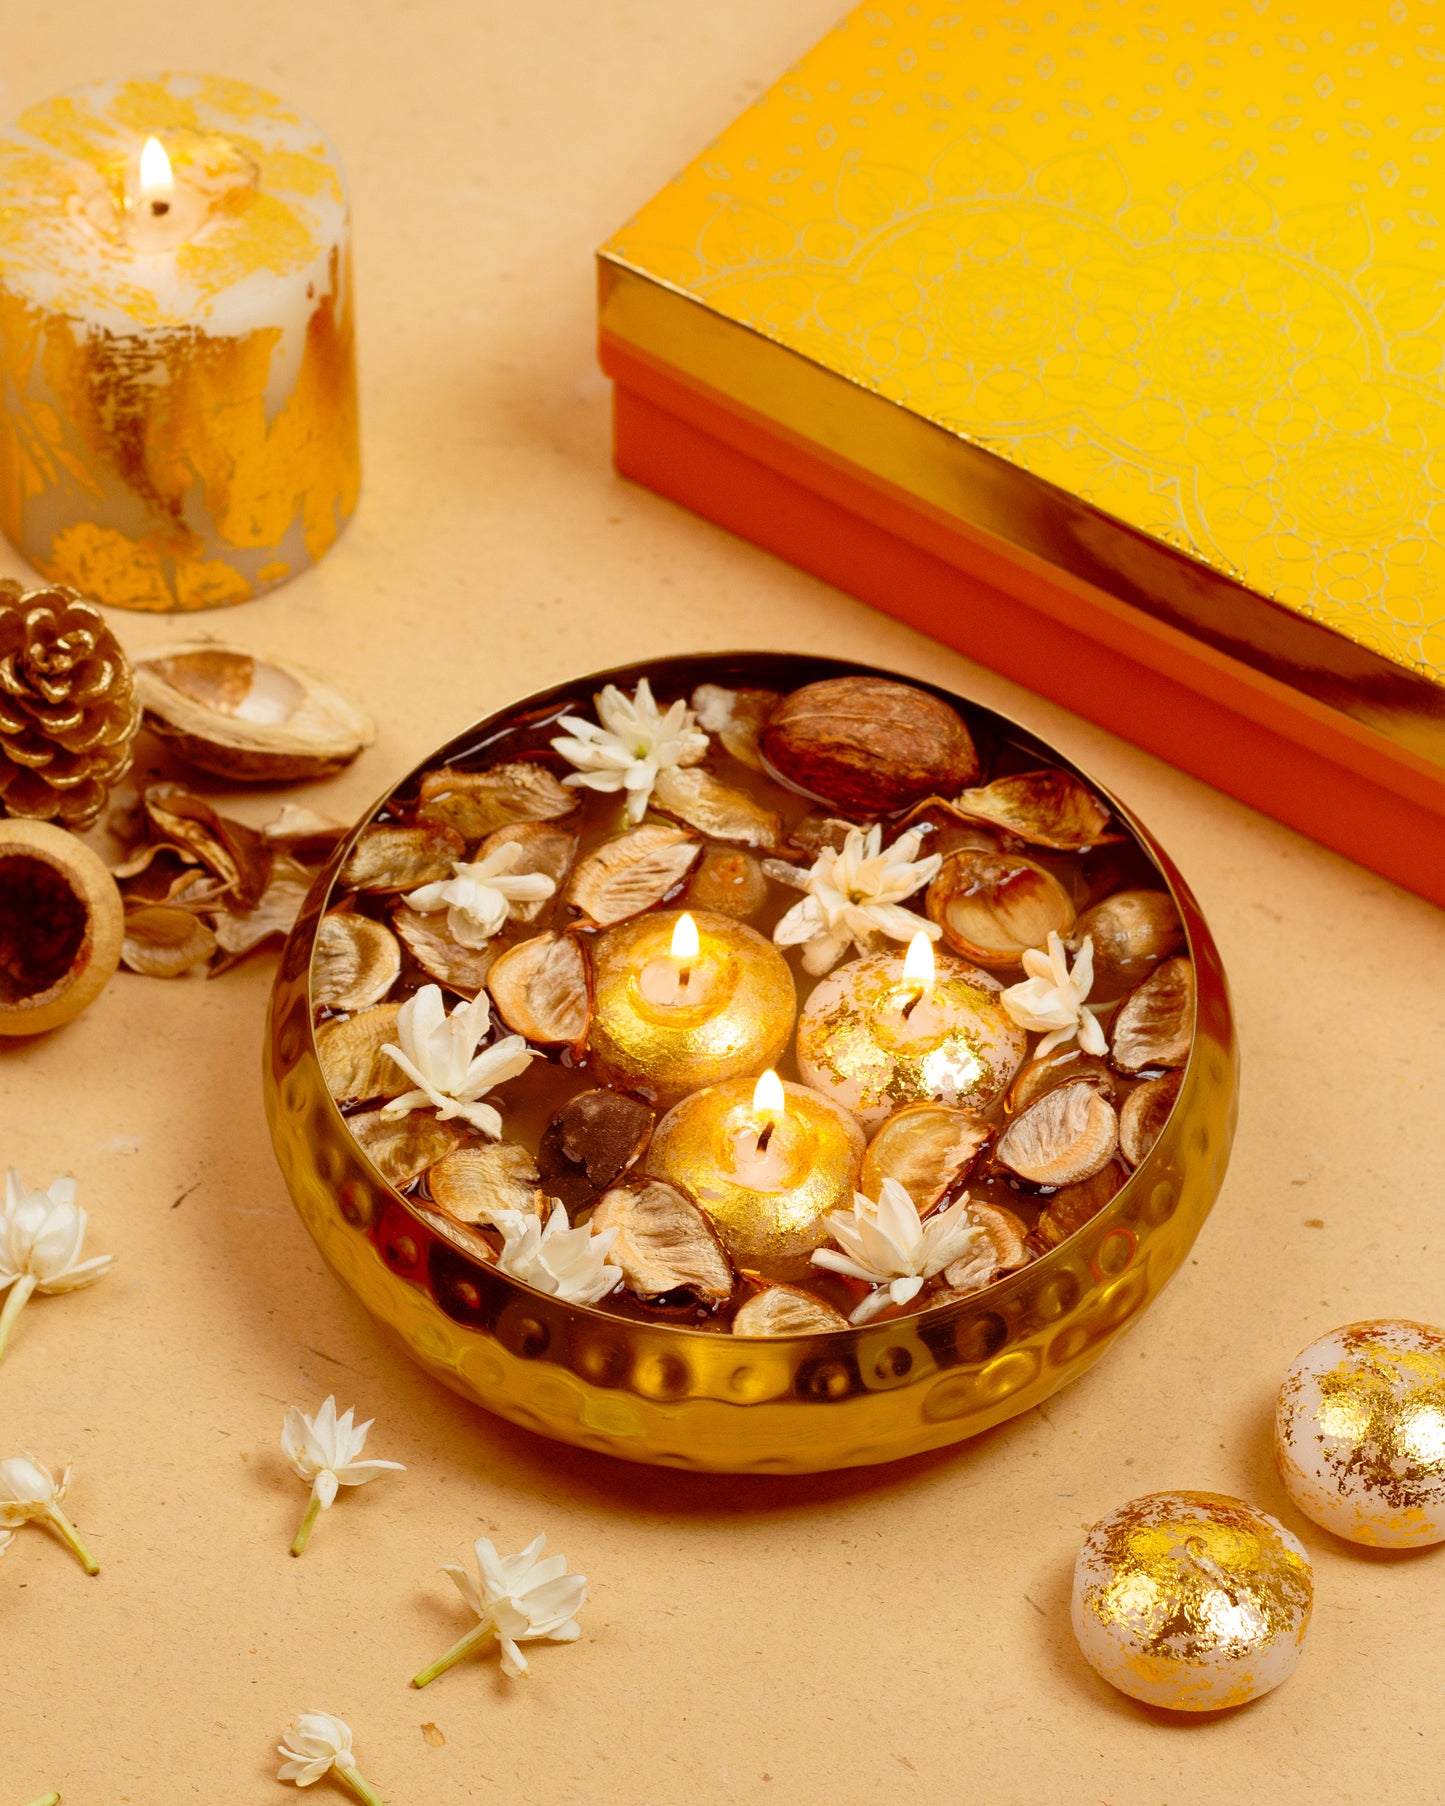 AuraDecor Urli Gift Set with Floating Candles & Potpourri in a Gift Box